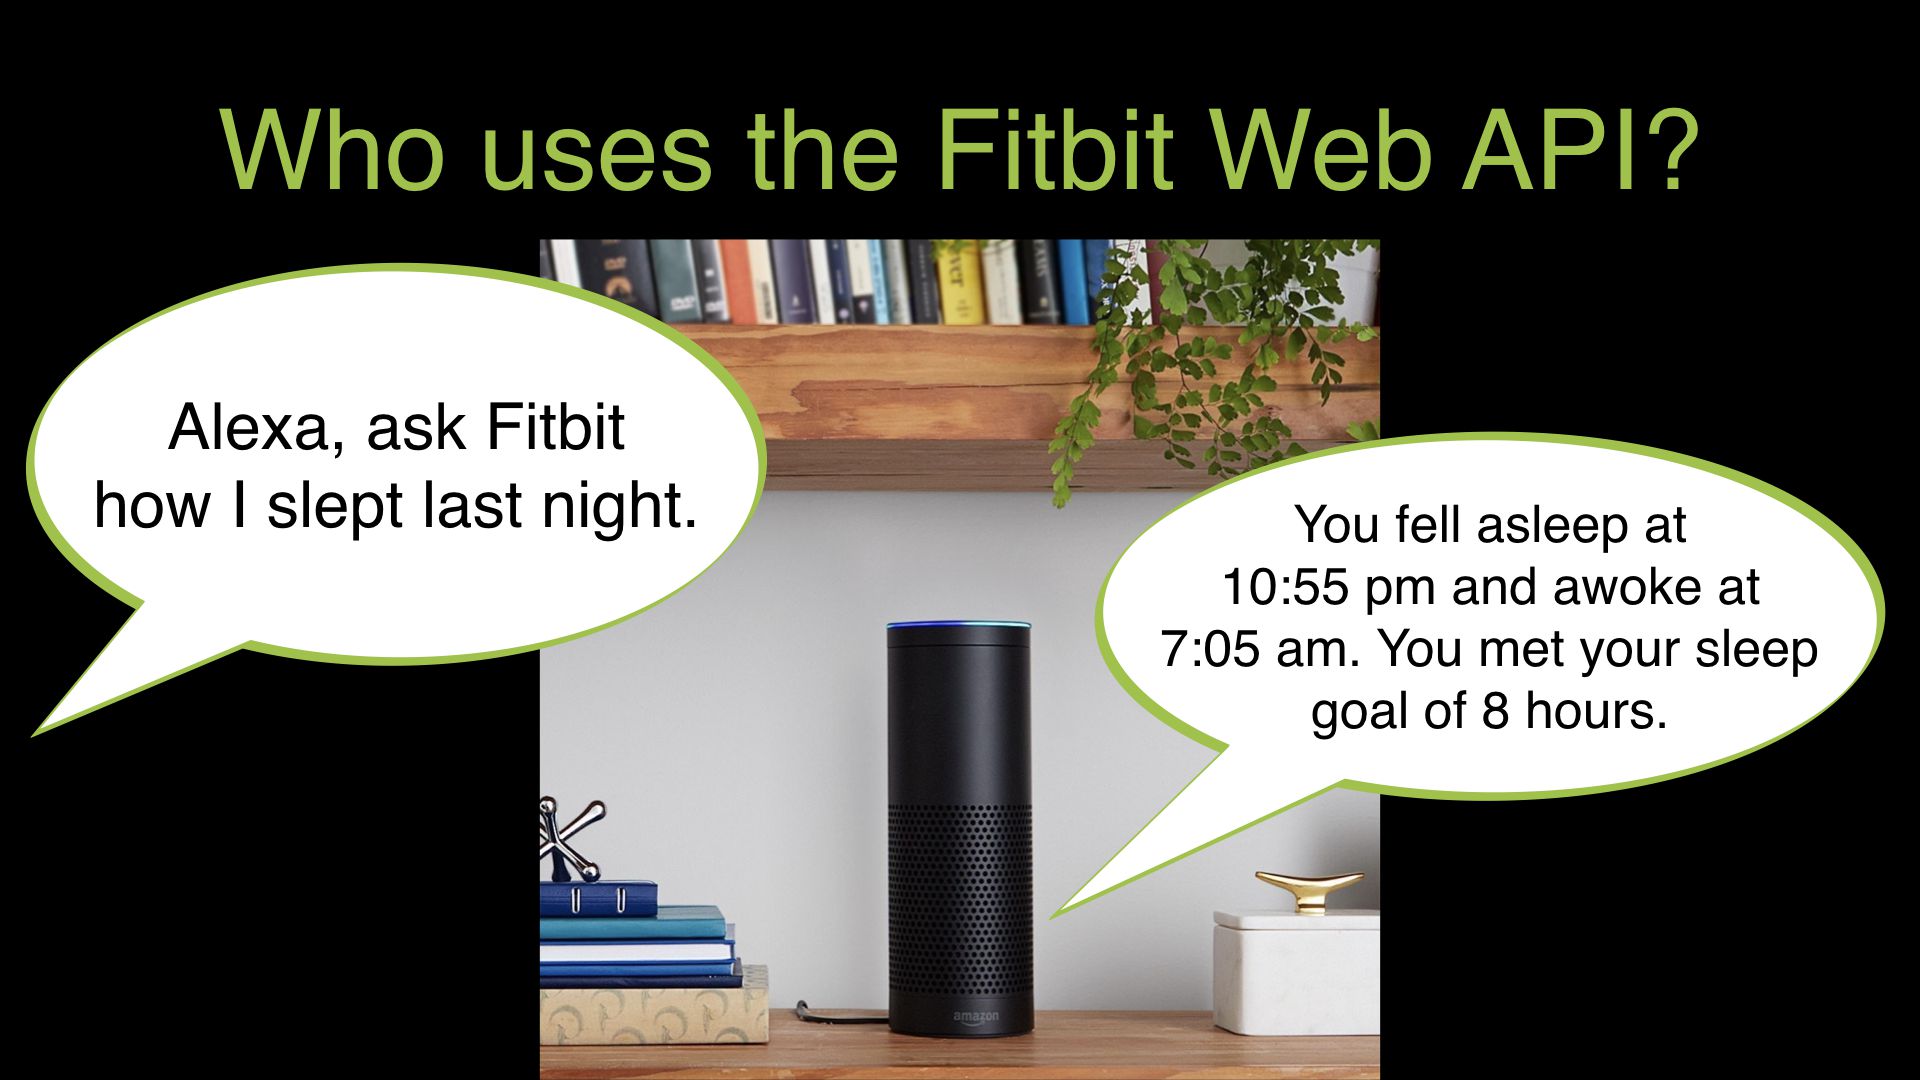 Photo of Amazon Echo smart speaker with speech bubbles. Alexa, ask Fitbit how I slept last night. You fell asleep at 10:55 pm and awoke at 7:05 am. You met your sleep goal of 8 hours.